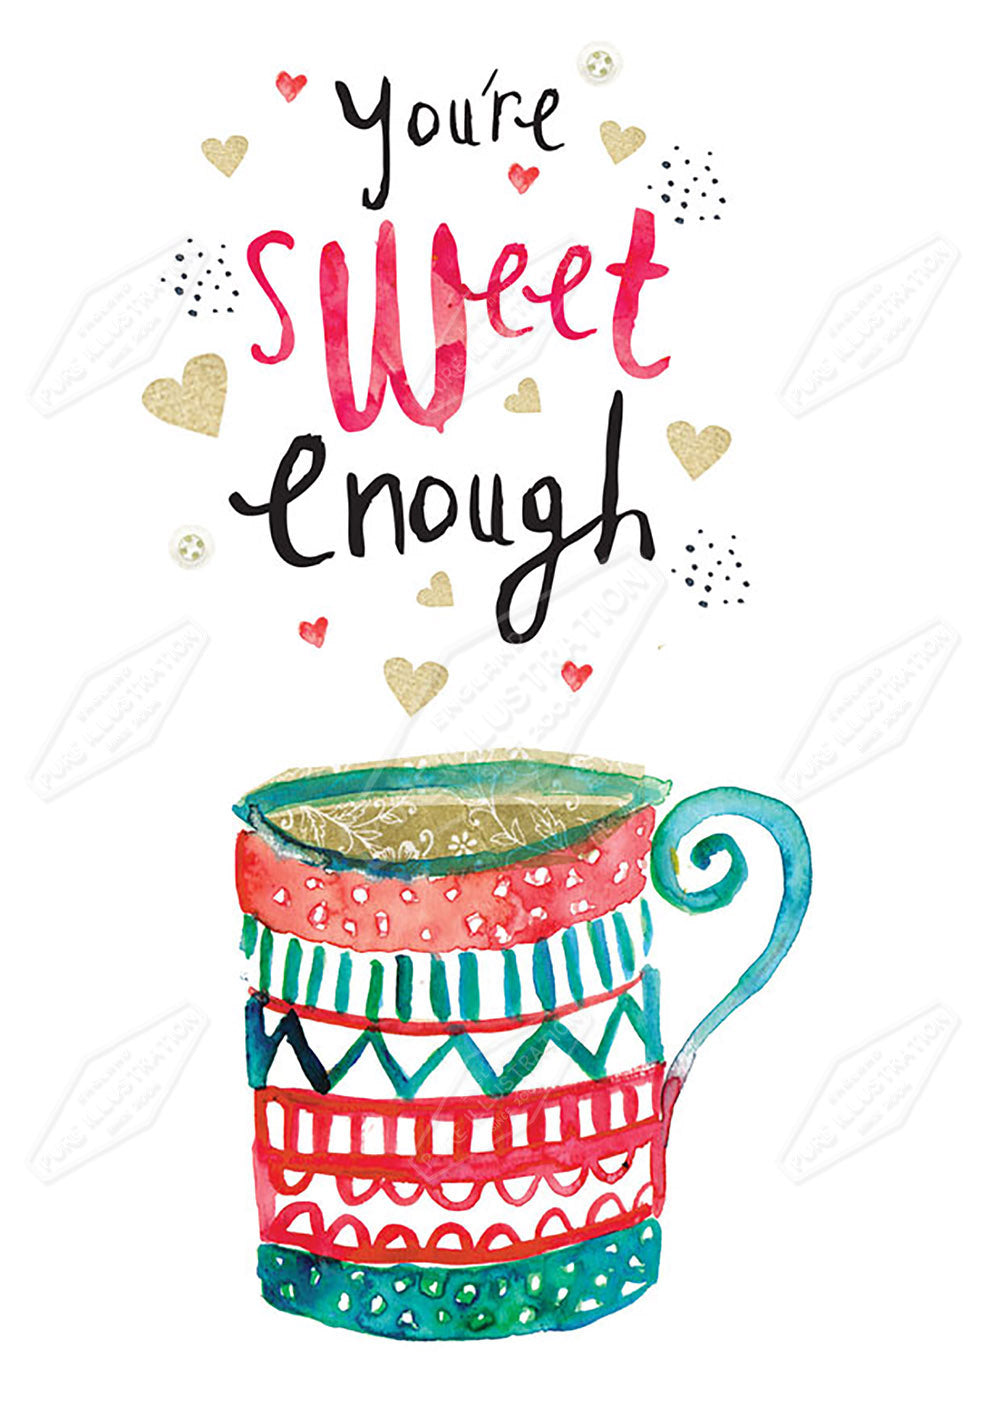 00025479EST- Emily Stalley is represented by Pure Art Licensing Agency - Love Greeting Card Design